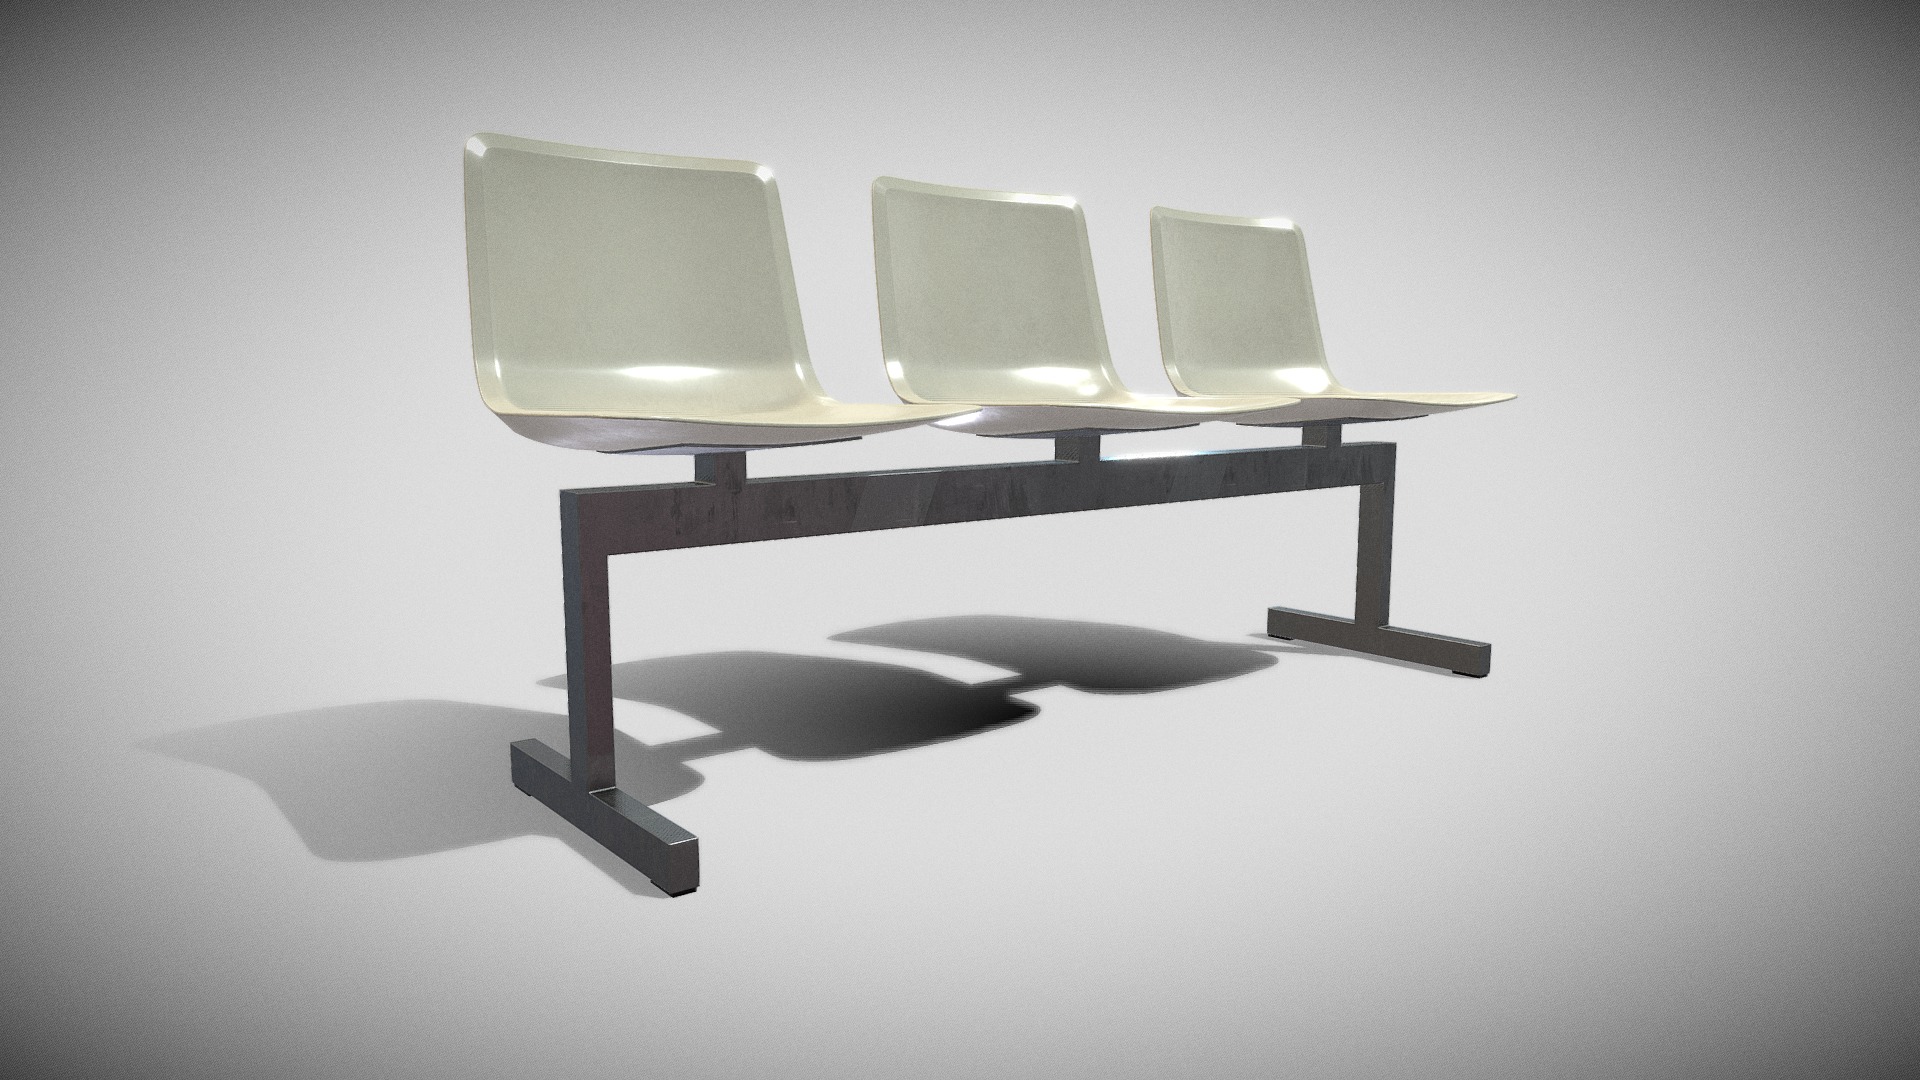 3D model PATO Bench Model-4330 Steel - This is a 3D model of the PATO Bench Model-4330 Steel. The 3D model is about a table with chairs on it.